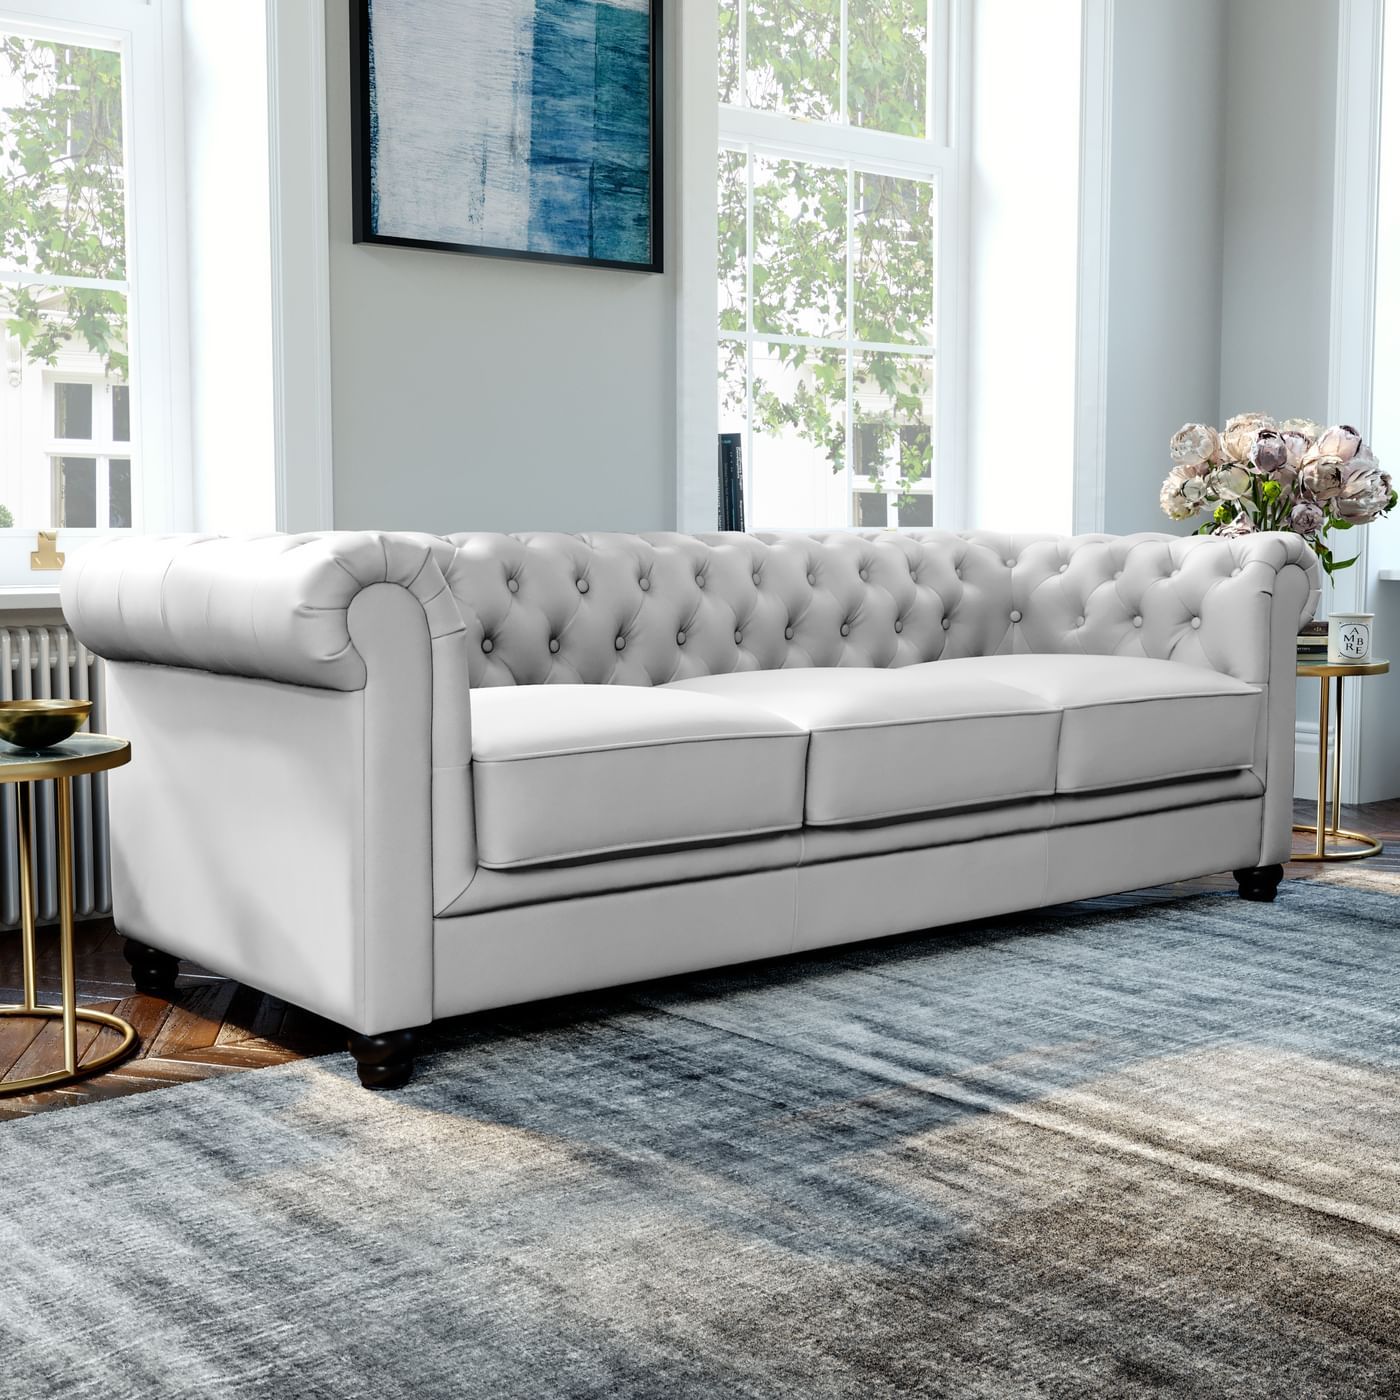 Hampton Light Grey Leather 3 Seater Chesterfield Sofa | Furniture Choice With Regard To Sofas In Light Gray (View 2 of 22)